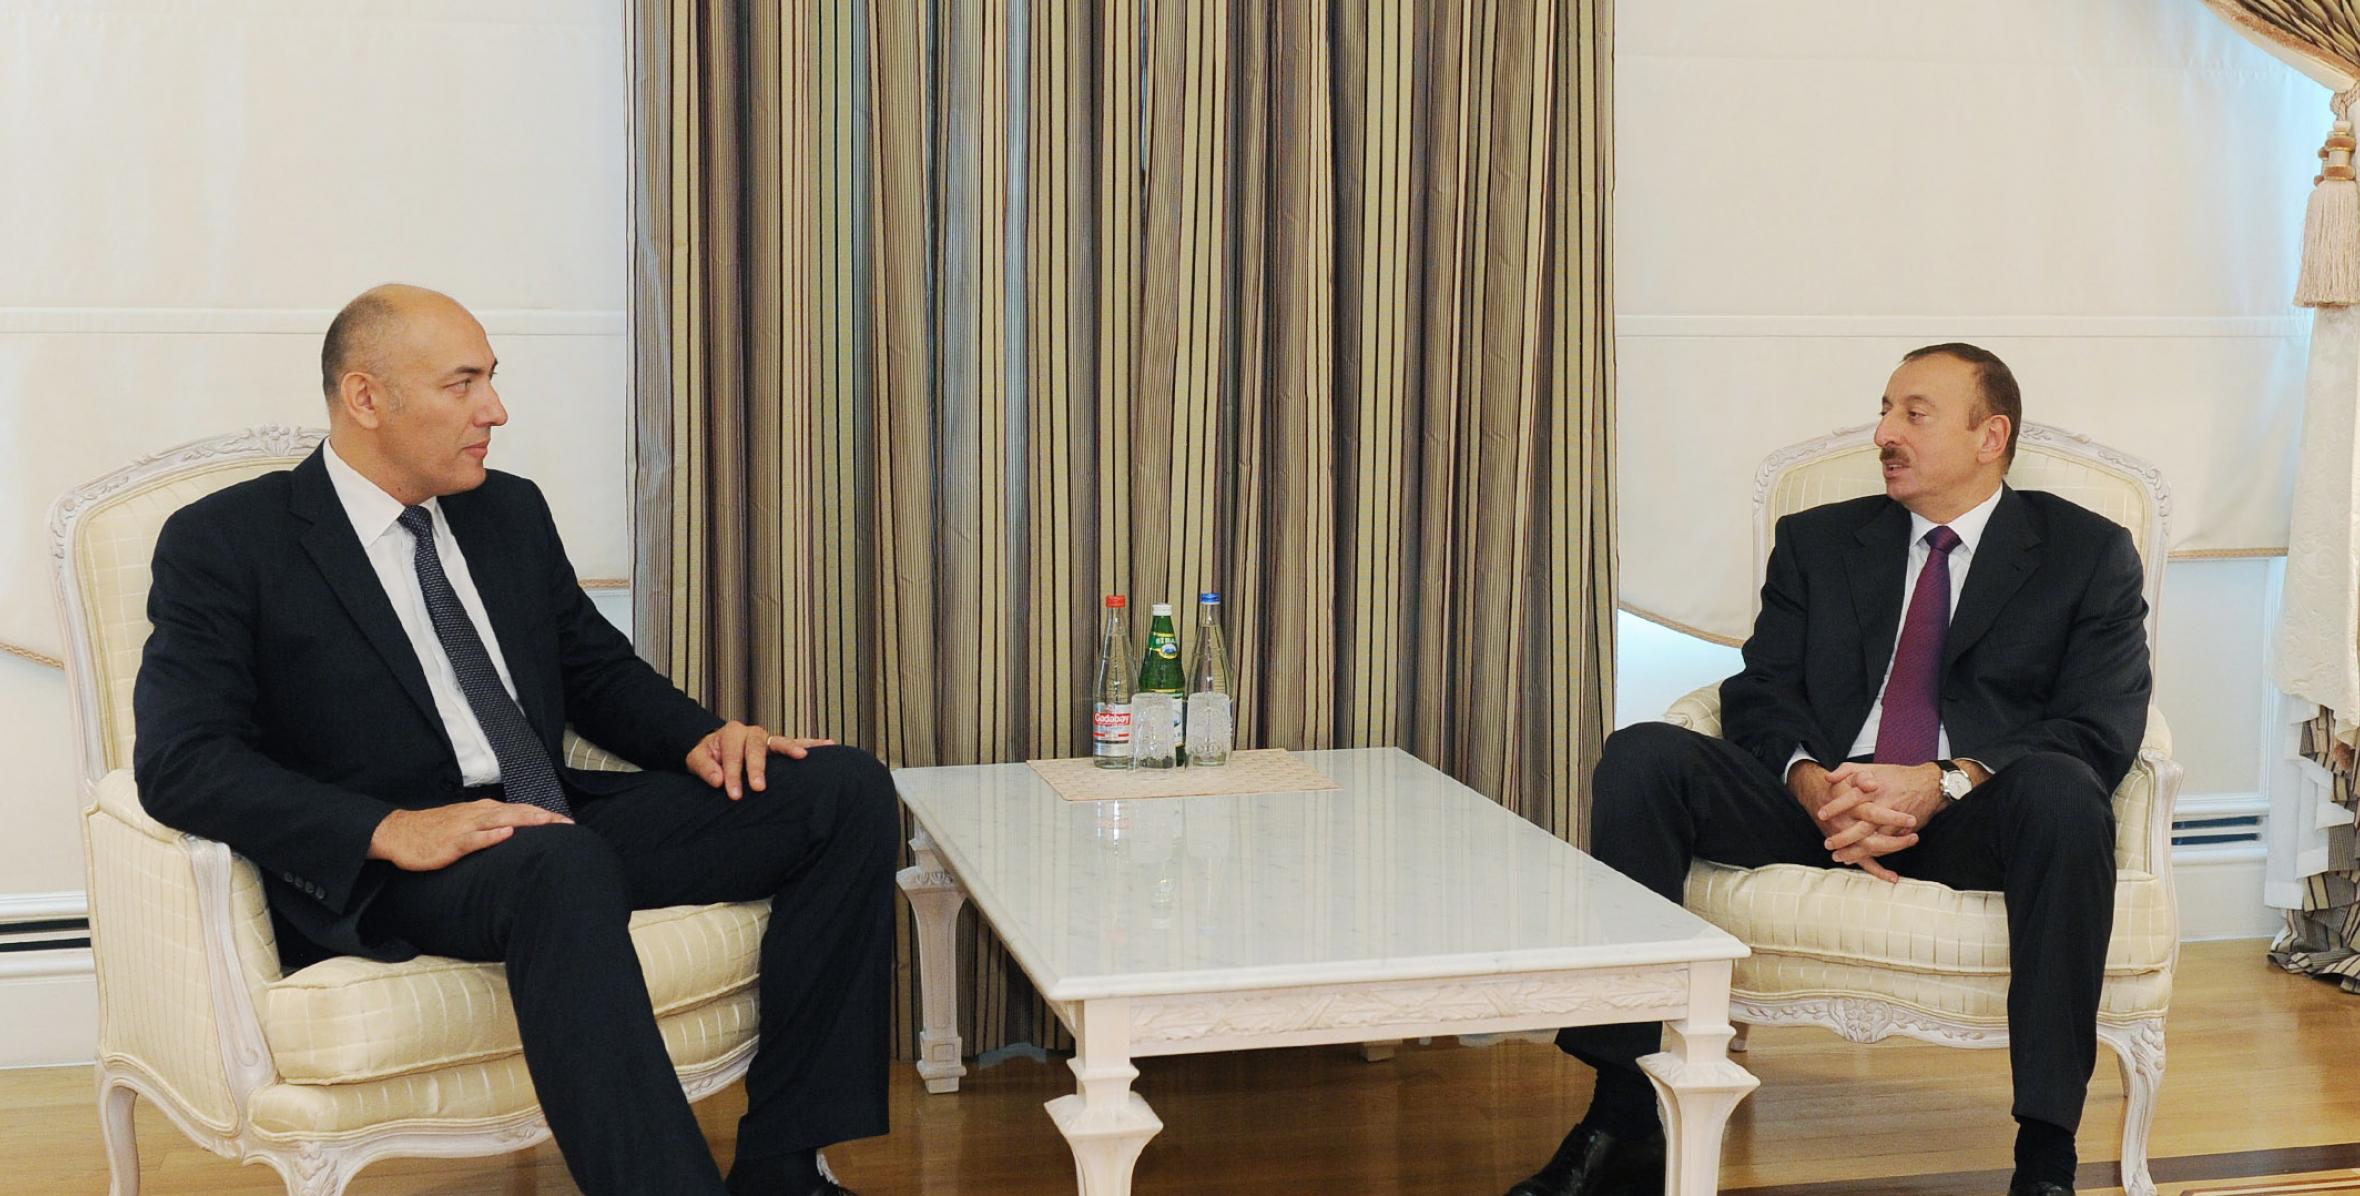 Ilham Aliyev received the outgoing Lithuanian Ambassador at the end of his diplomatic mission